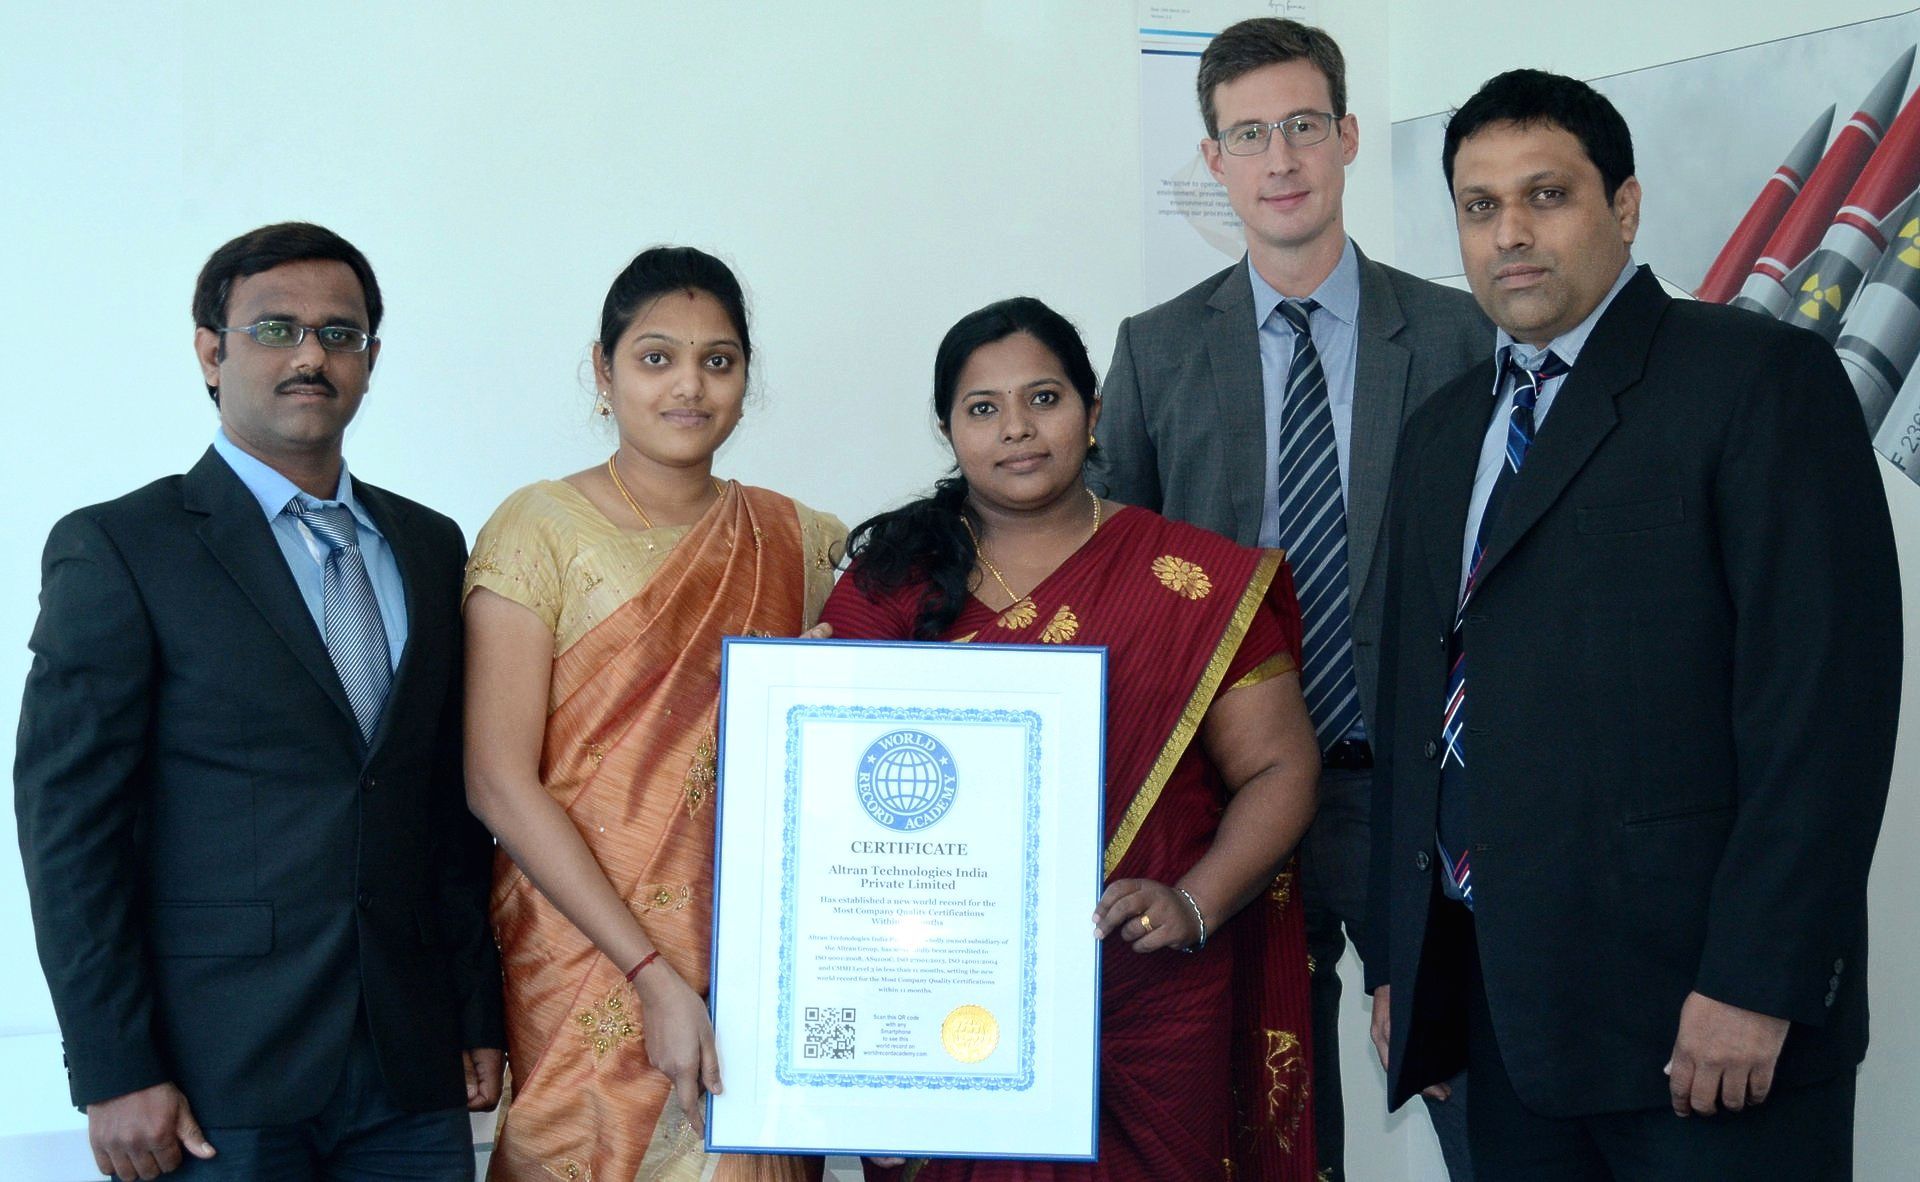 Most Company Quality Certifications within 11 months: Altran Technologies India sets world record (VIDEO) 